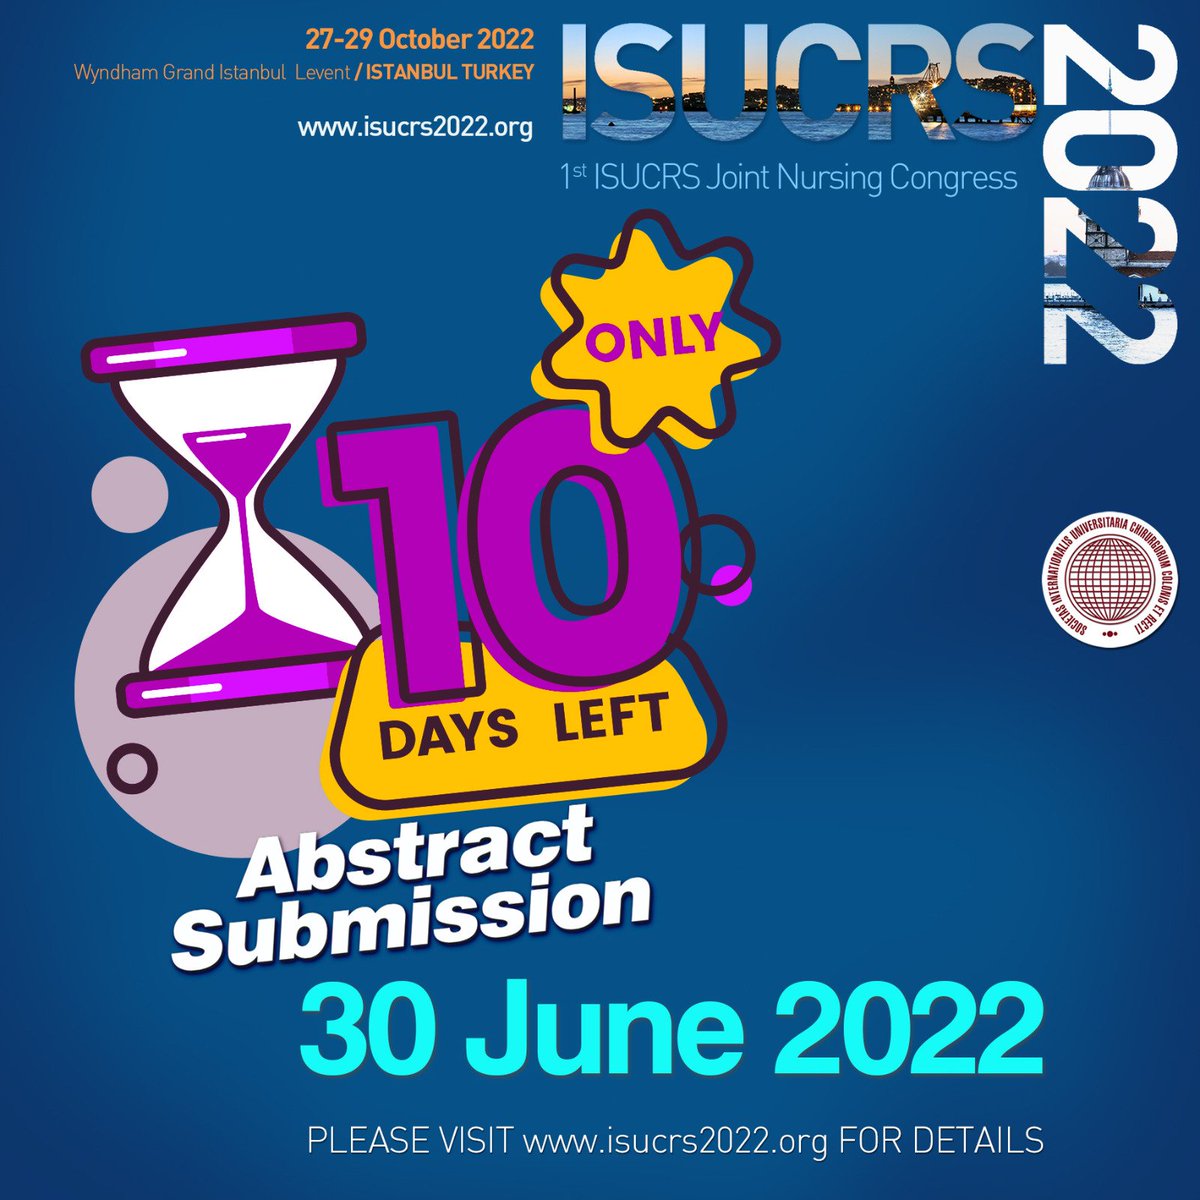 LAST 1️⃣0️⃣ DAYS! Save the date and don't miss the chance to submit your abstracts for ISUCRS 2022. Please visit our official website for details... #isucrs #isucrs2022 #istanbul